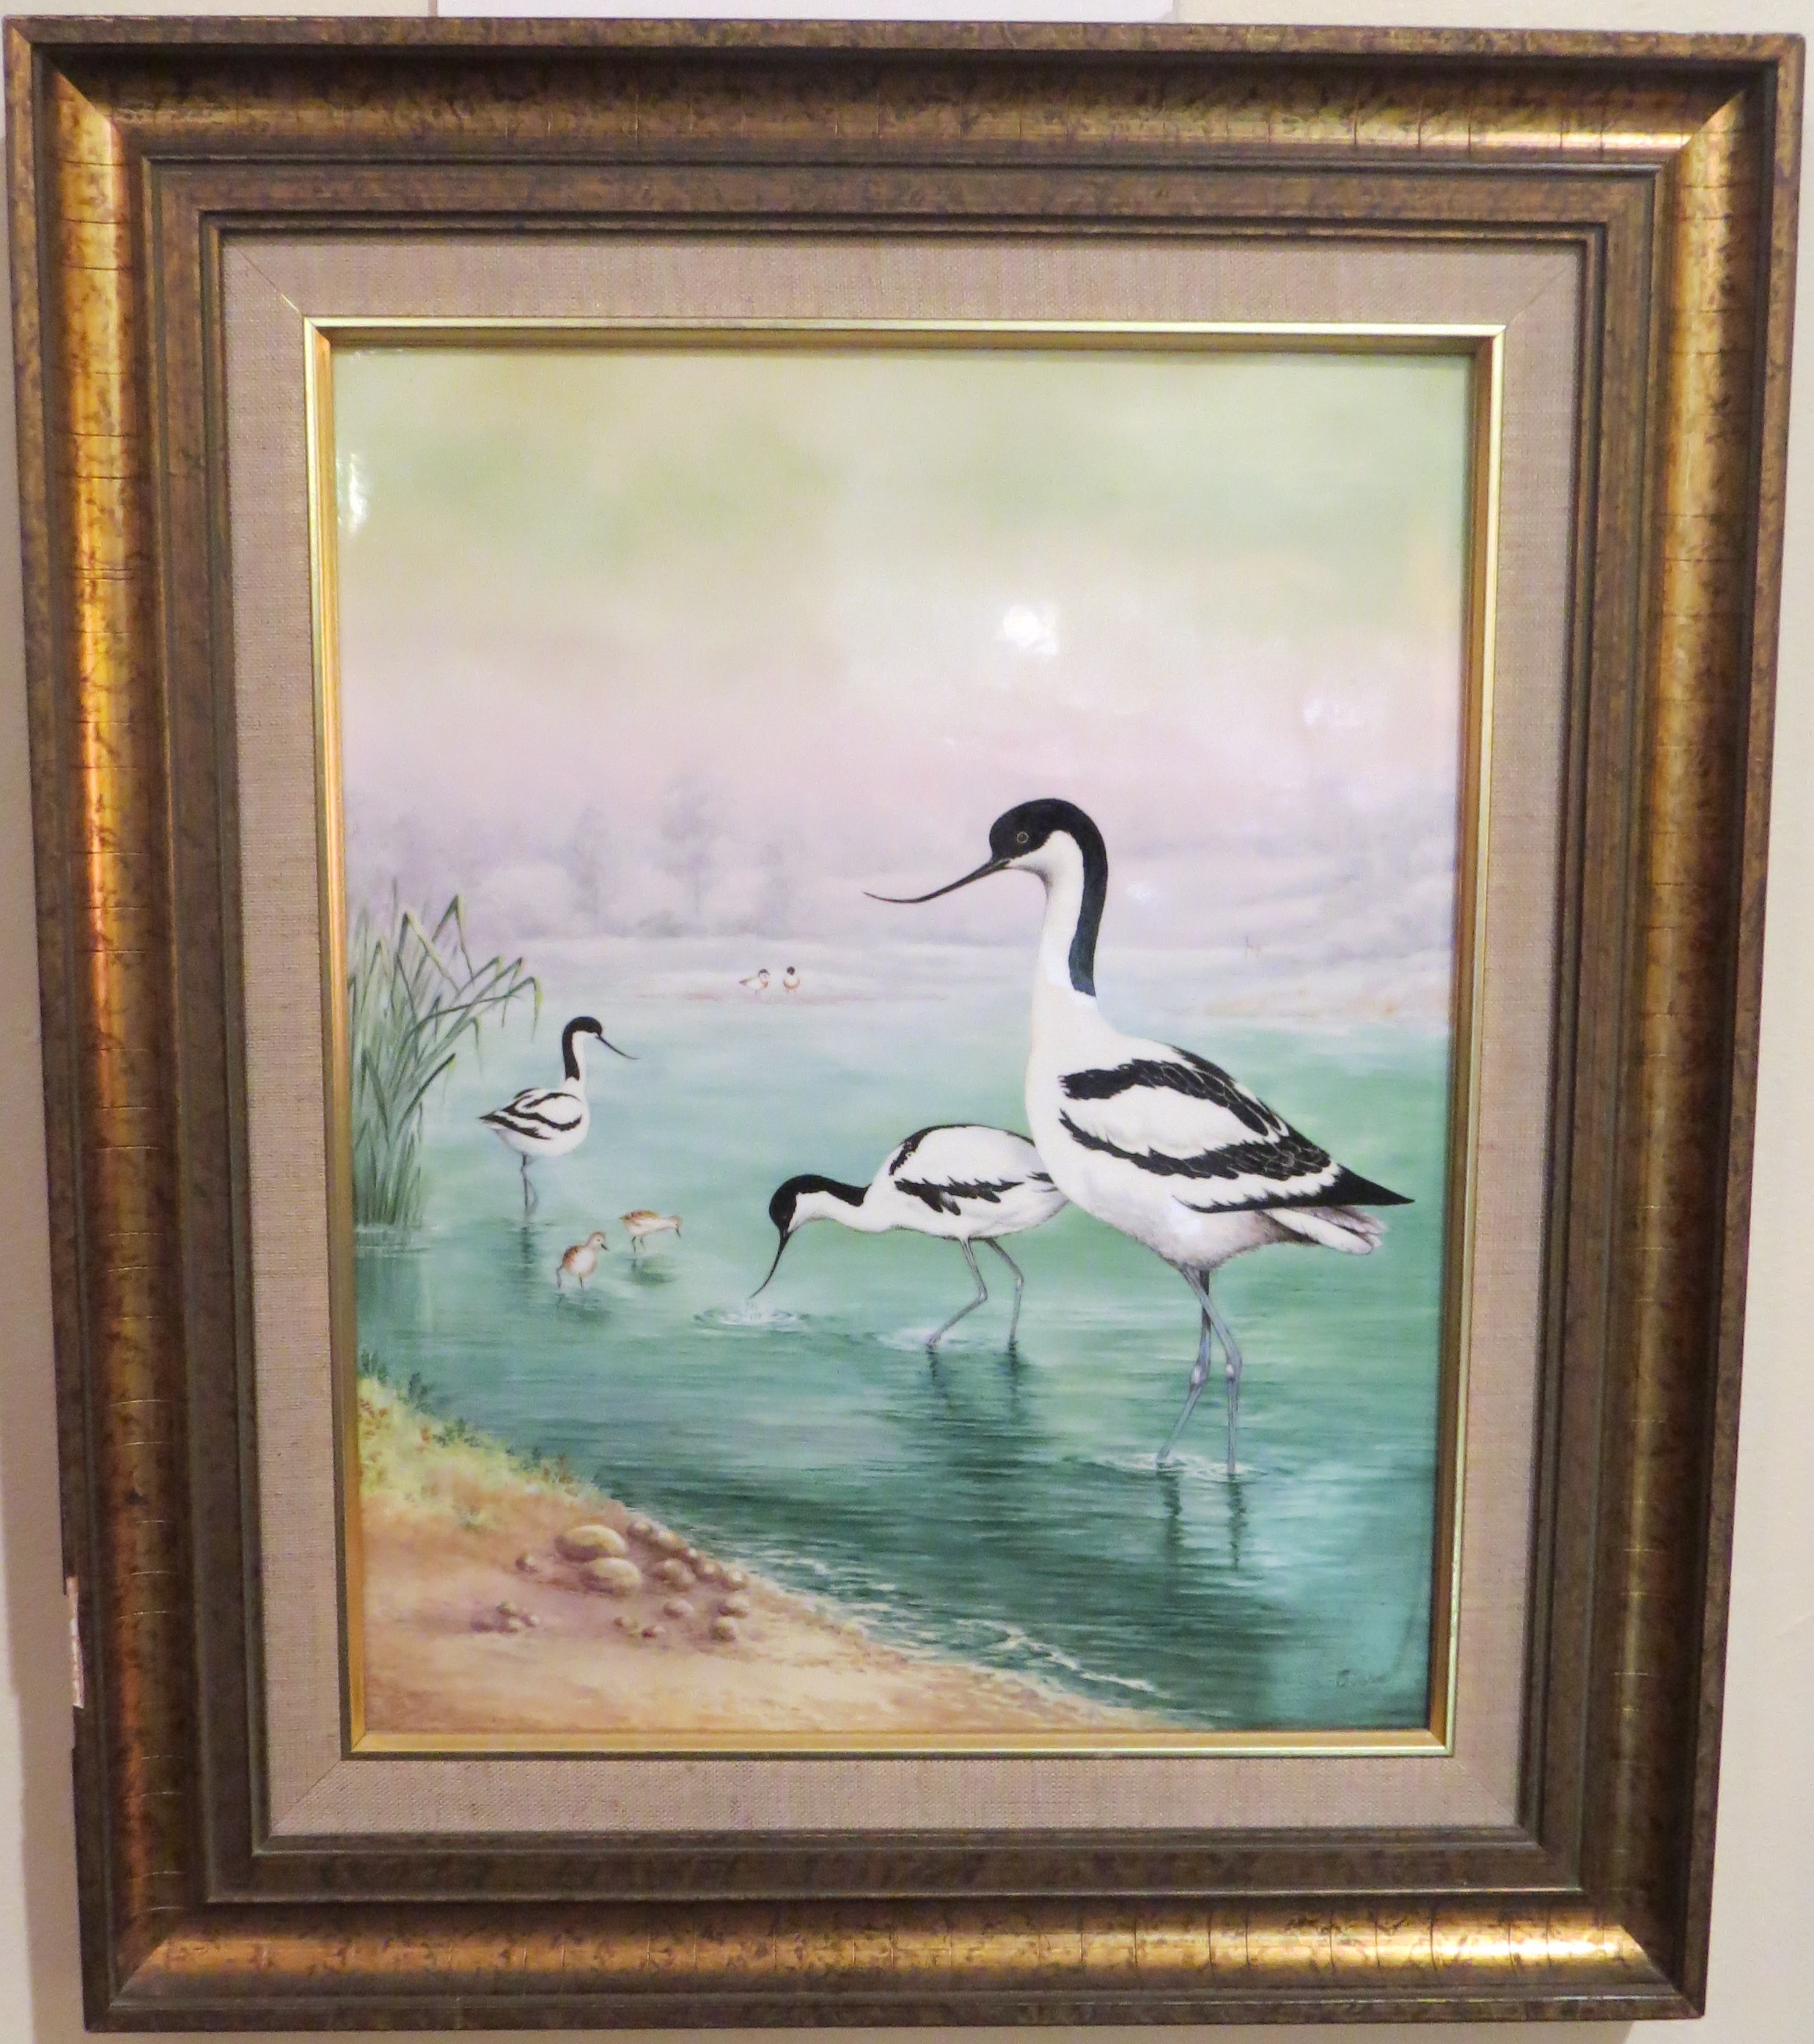 A Boehm Oil Painting on Porcelain; #5 of a Limited Edition of 25